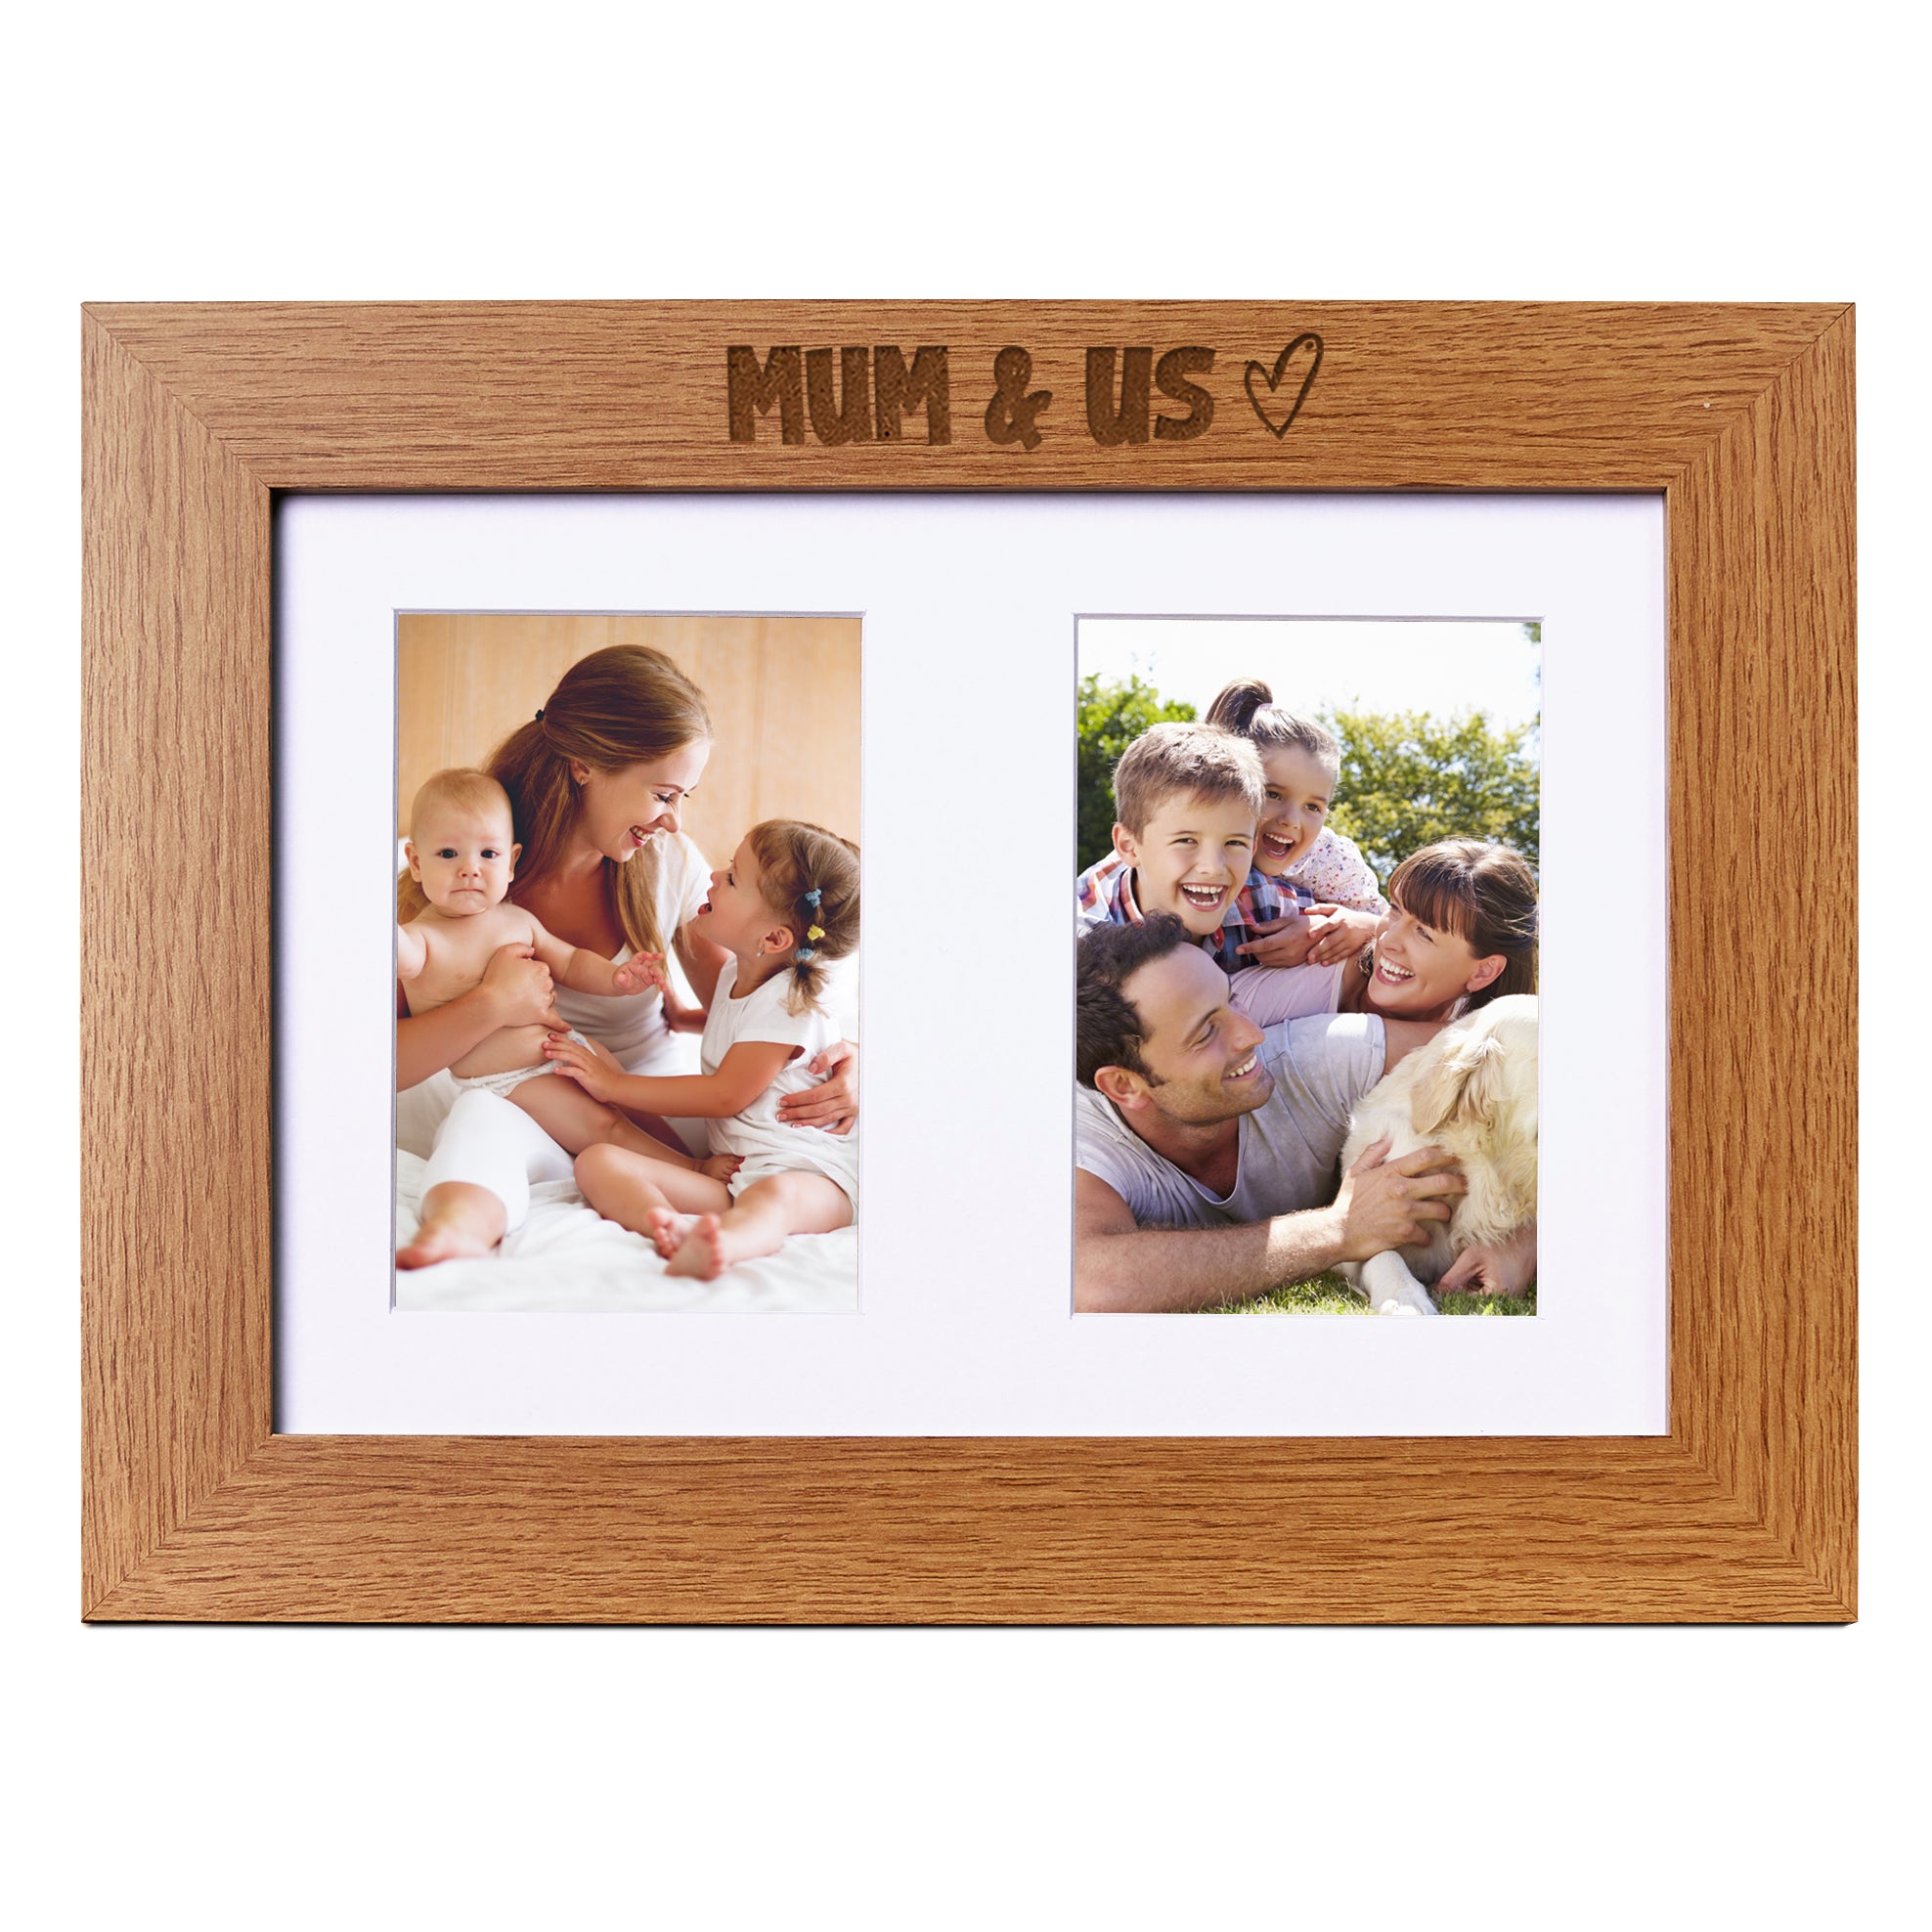 Mum and Us Photo Picture Frame Double 6x4 Inch